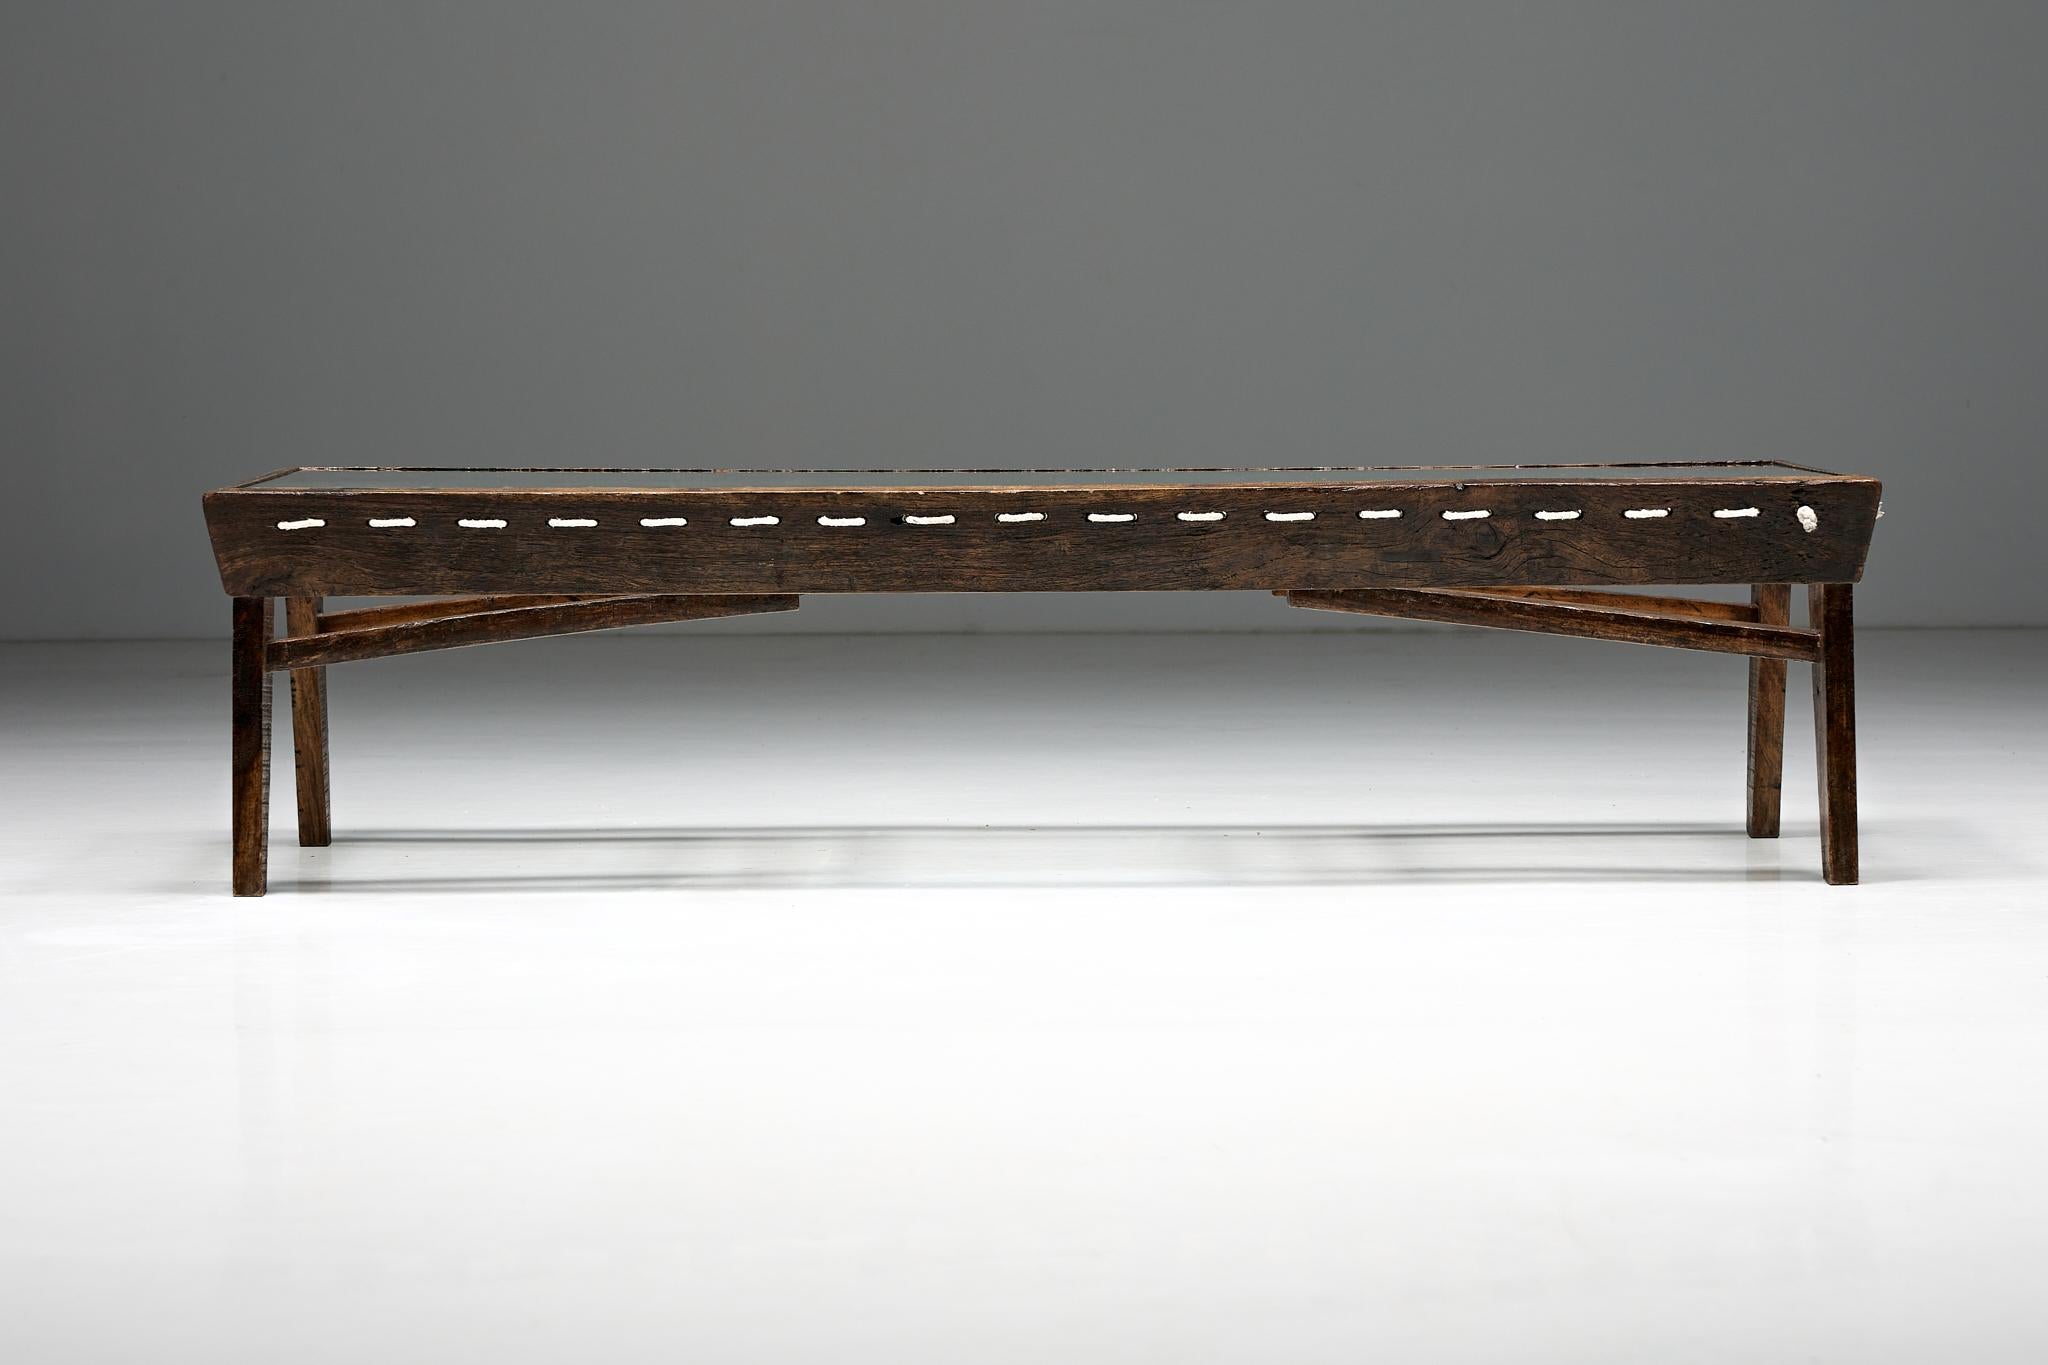 Indian Rectangular Coffee Table by Pierre Jeanneret, Chandigarh, 1960s For Sale